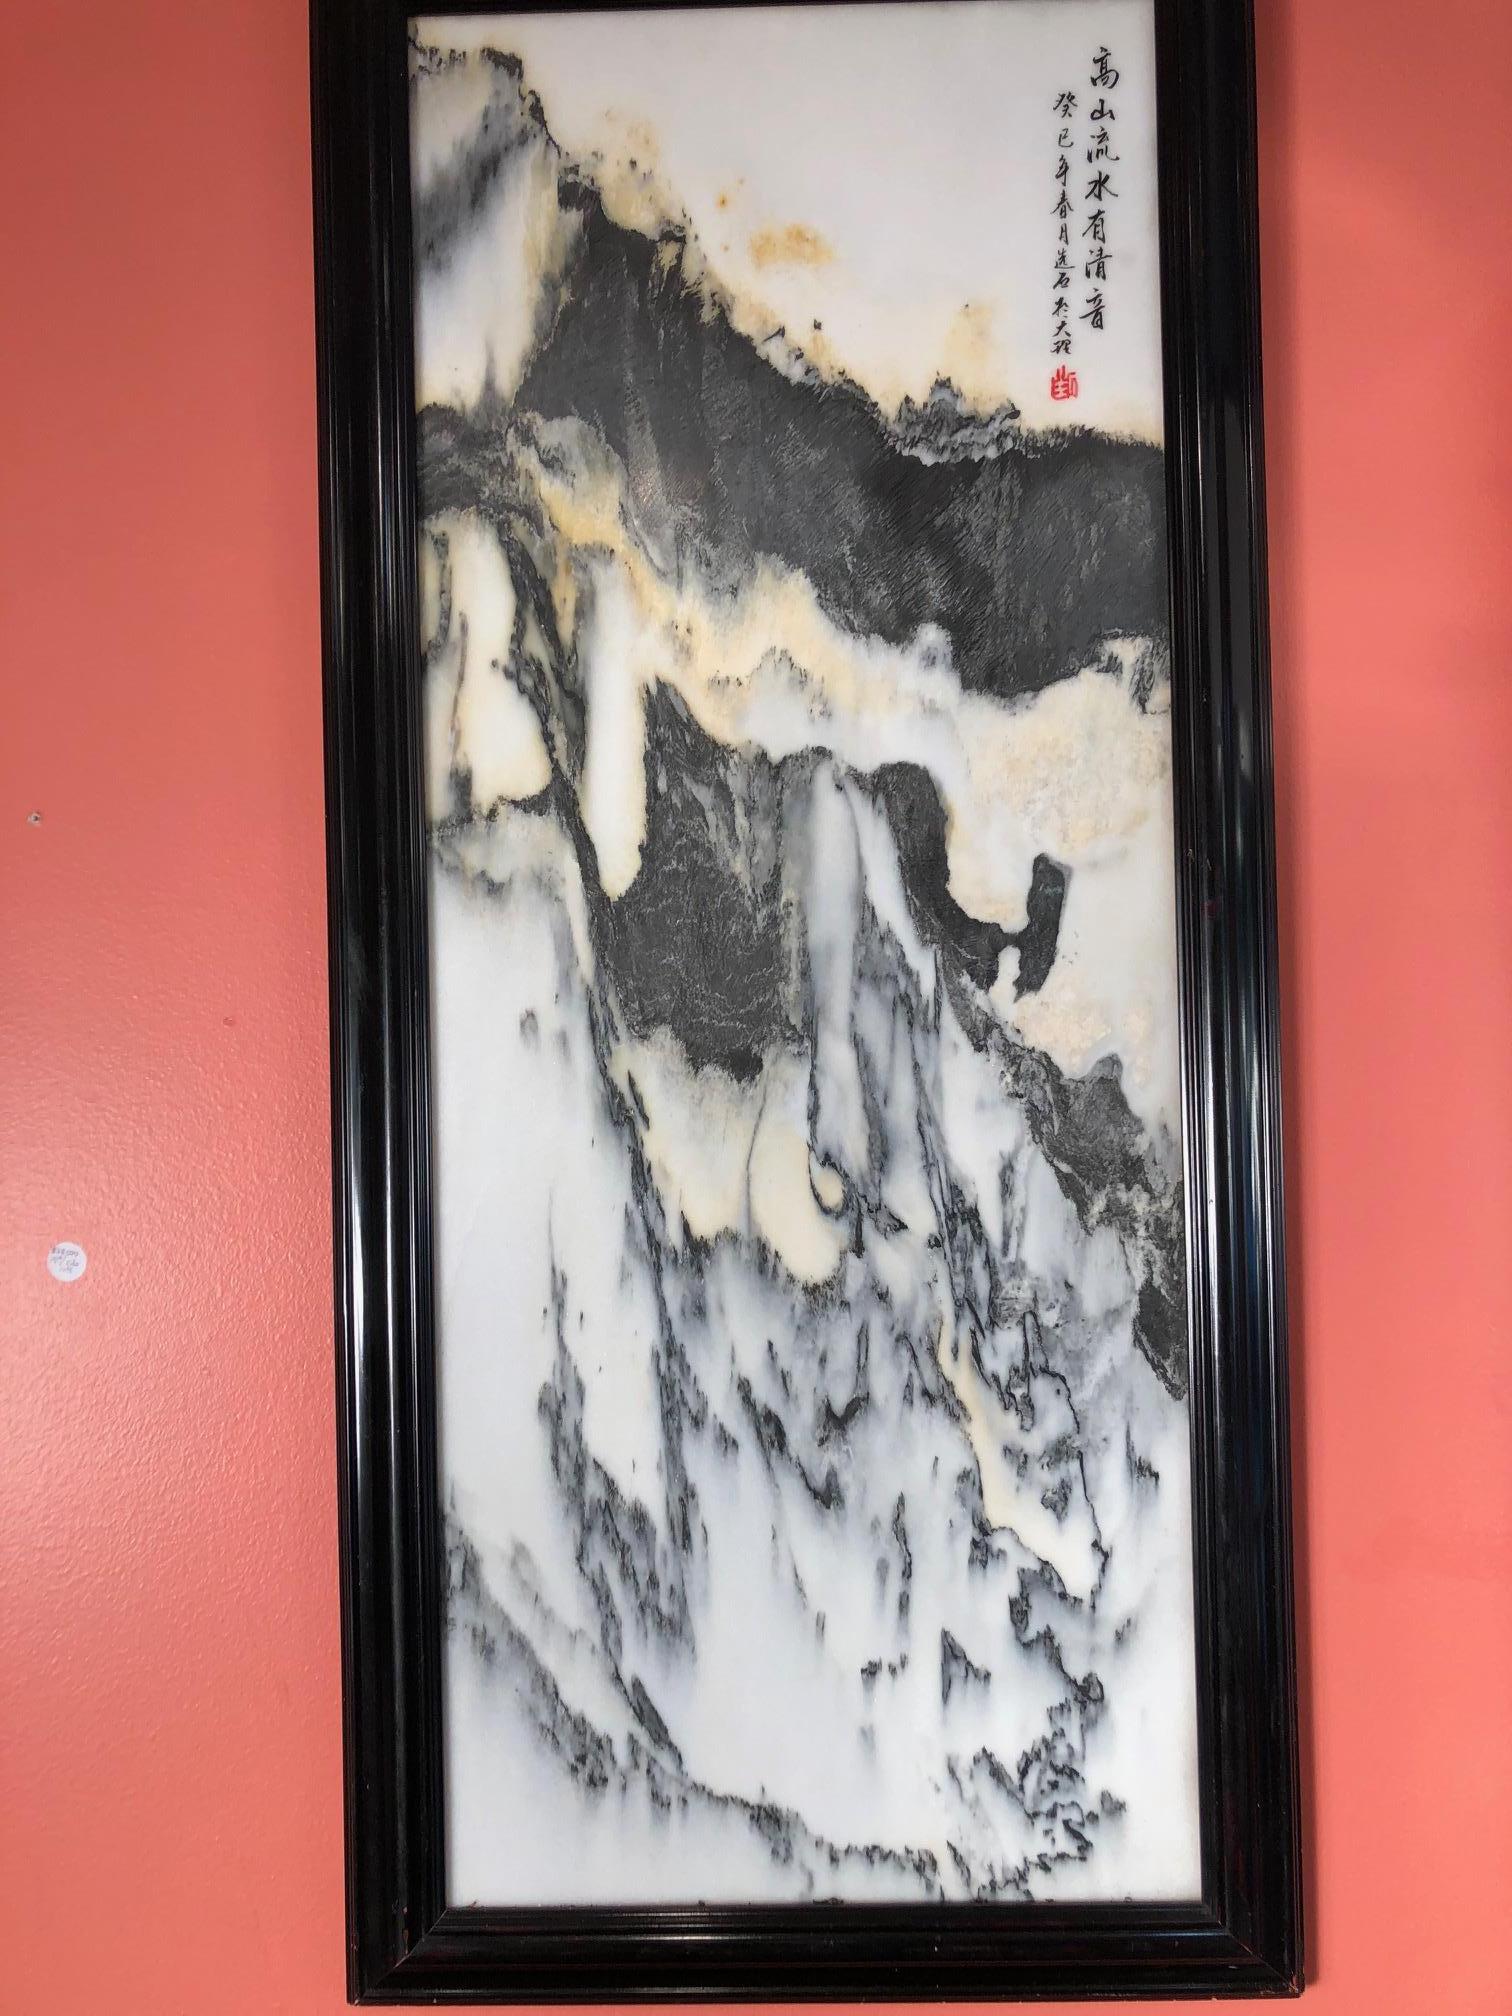 One-of-a-kind.

This Chinese extraordinary natural stone painting of a mountain range in contrasting natural light and dark colors white and dark green . This is called a dream stone Shih-hua. They are cut from historic Dali marble found in the